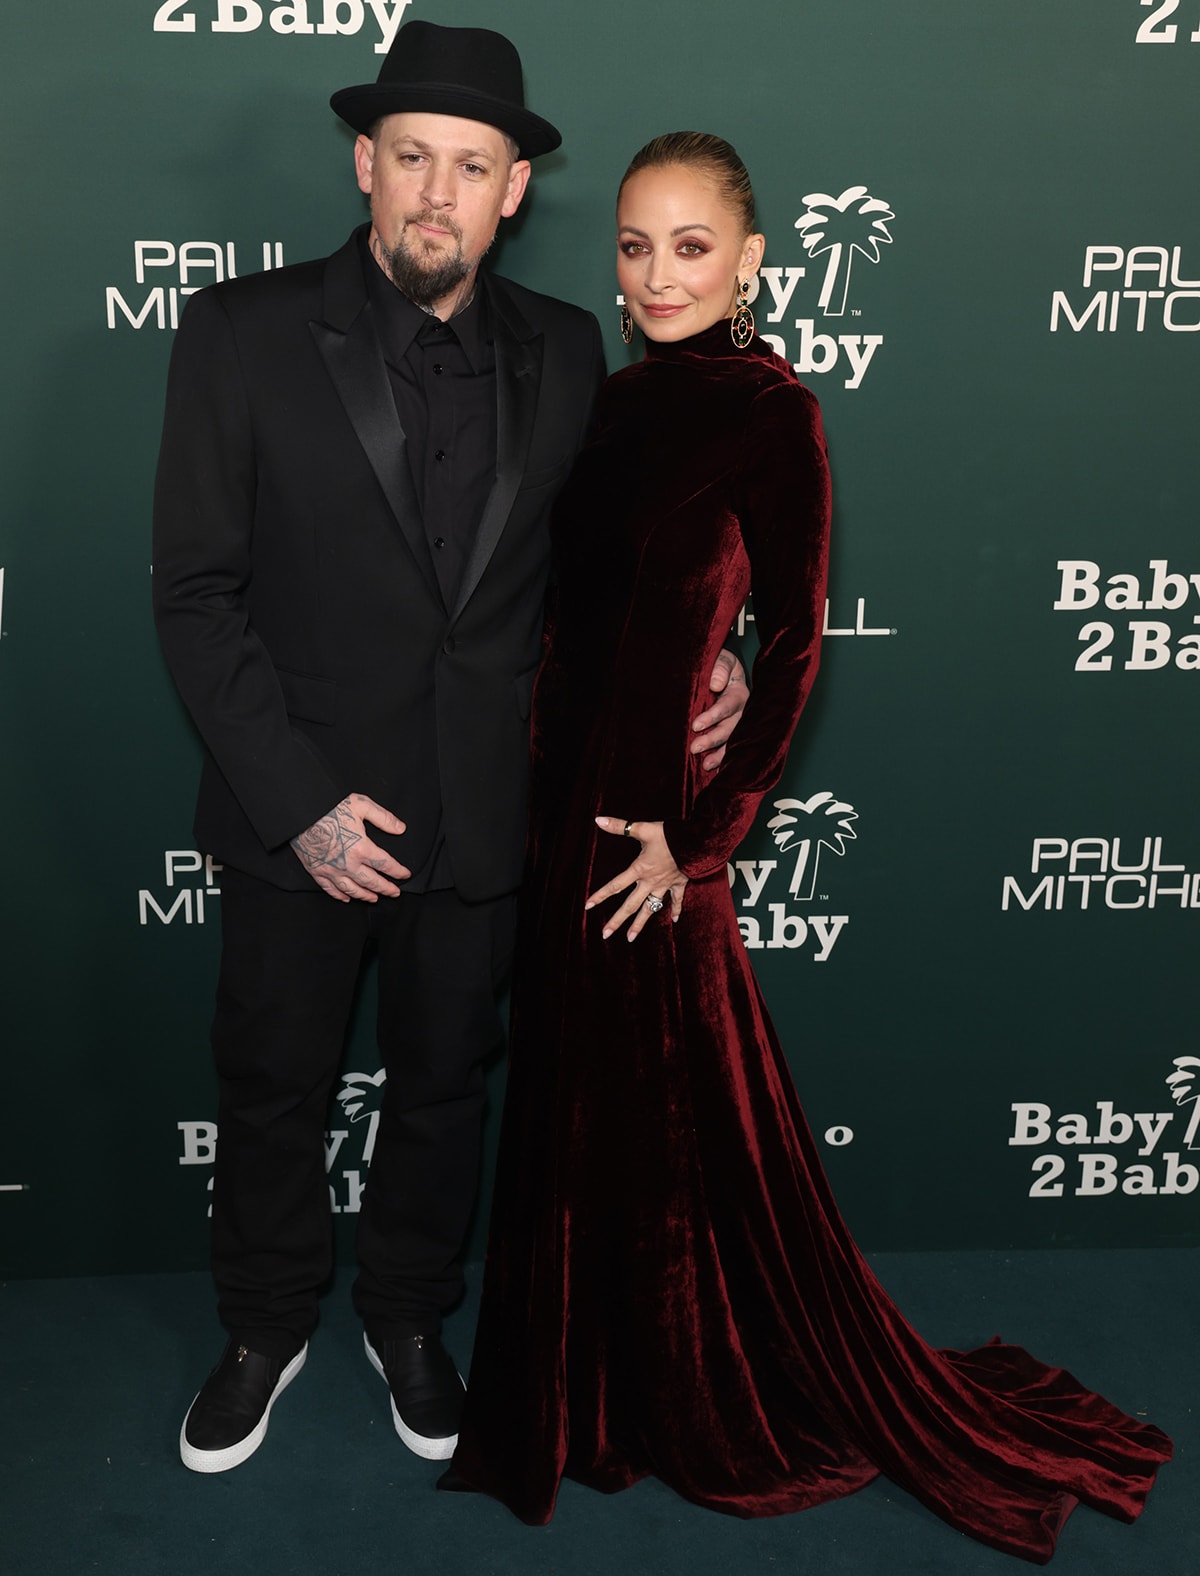 Nicole Richie poses with her husband of 17 years Joel Madden, who's clad in a black suit, white-soled black sneakers, and a black fedora